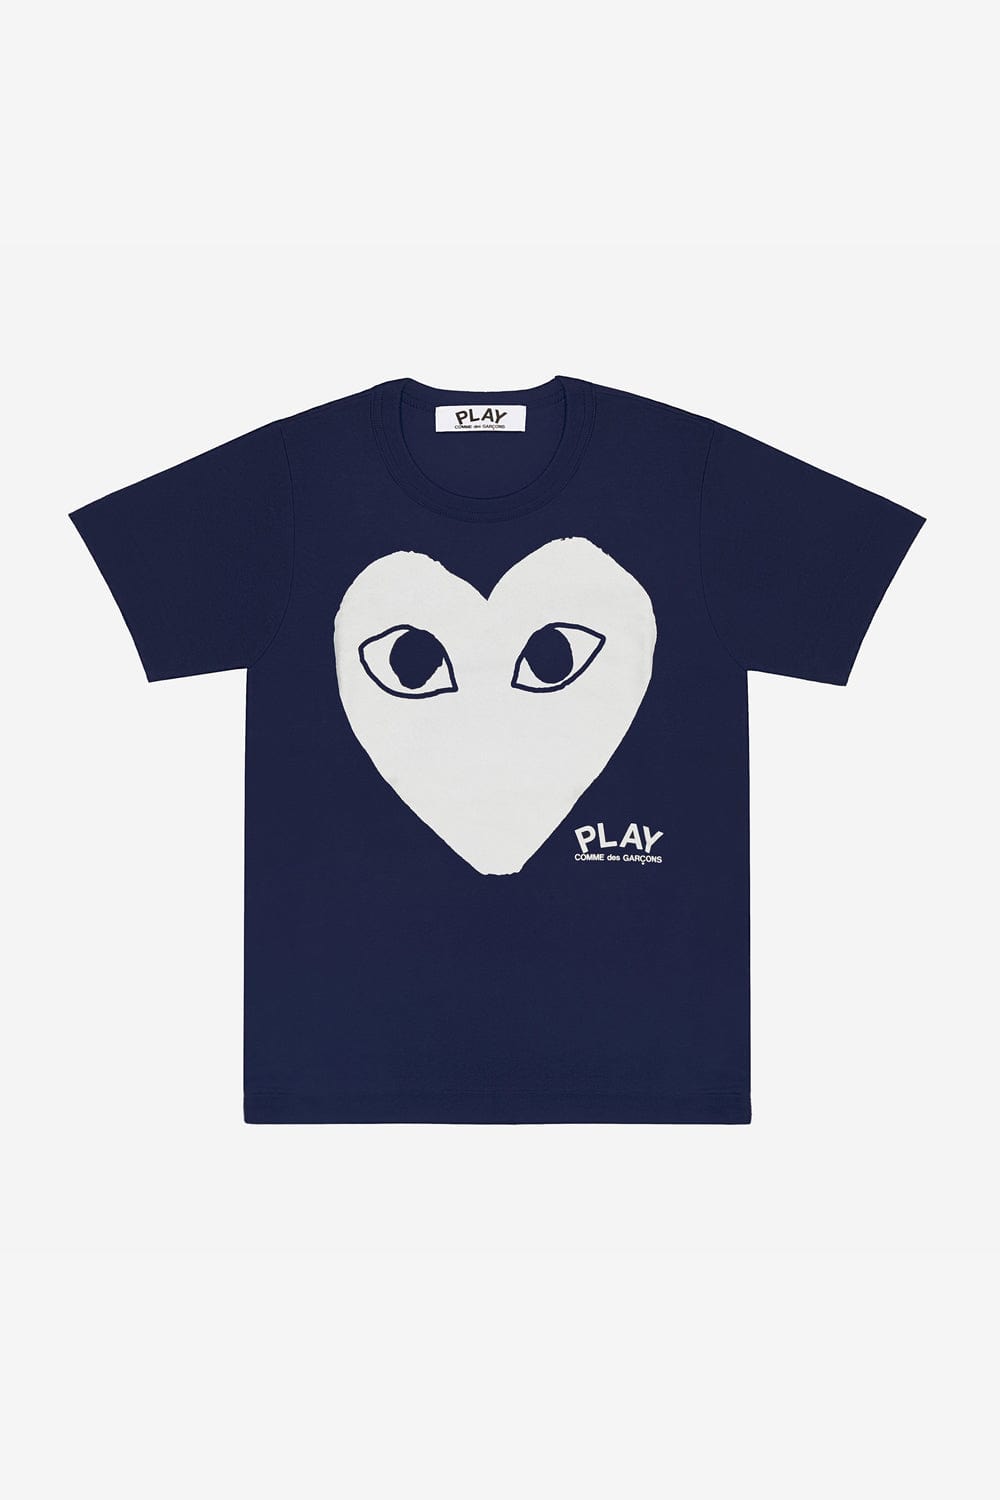 COMME des GARCONS PLAY T180 White Big Heart Tee (Navy)